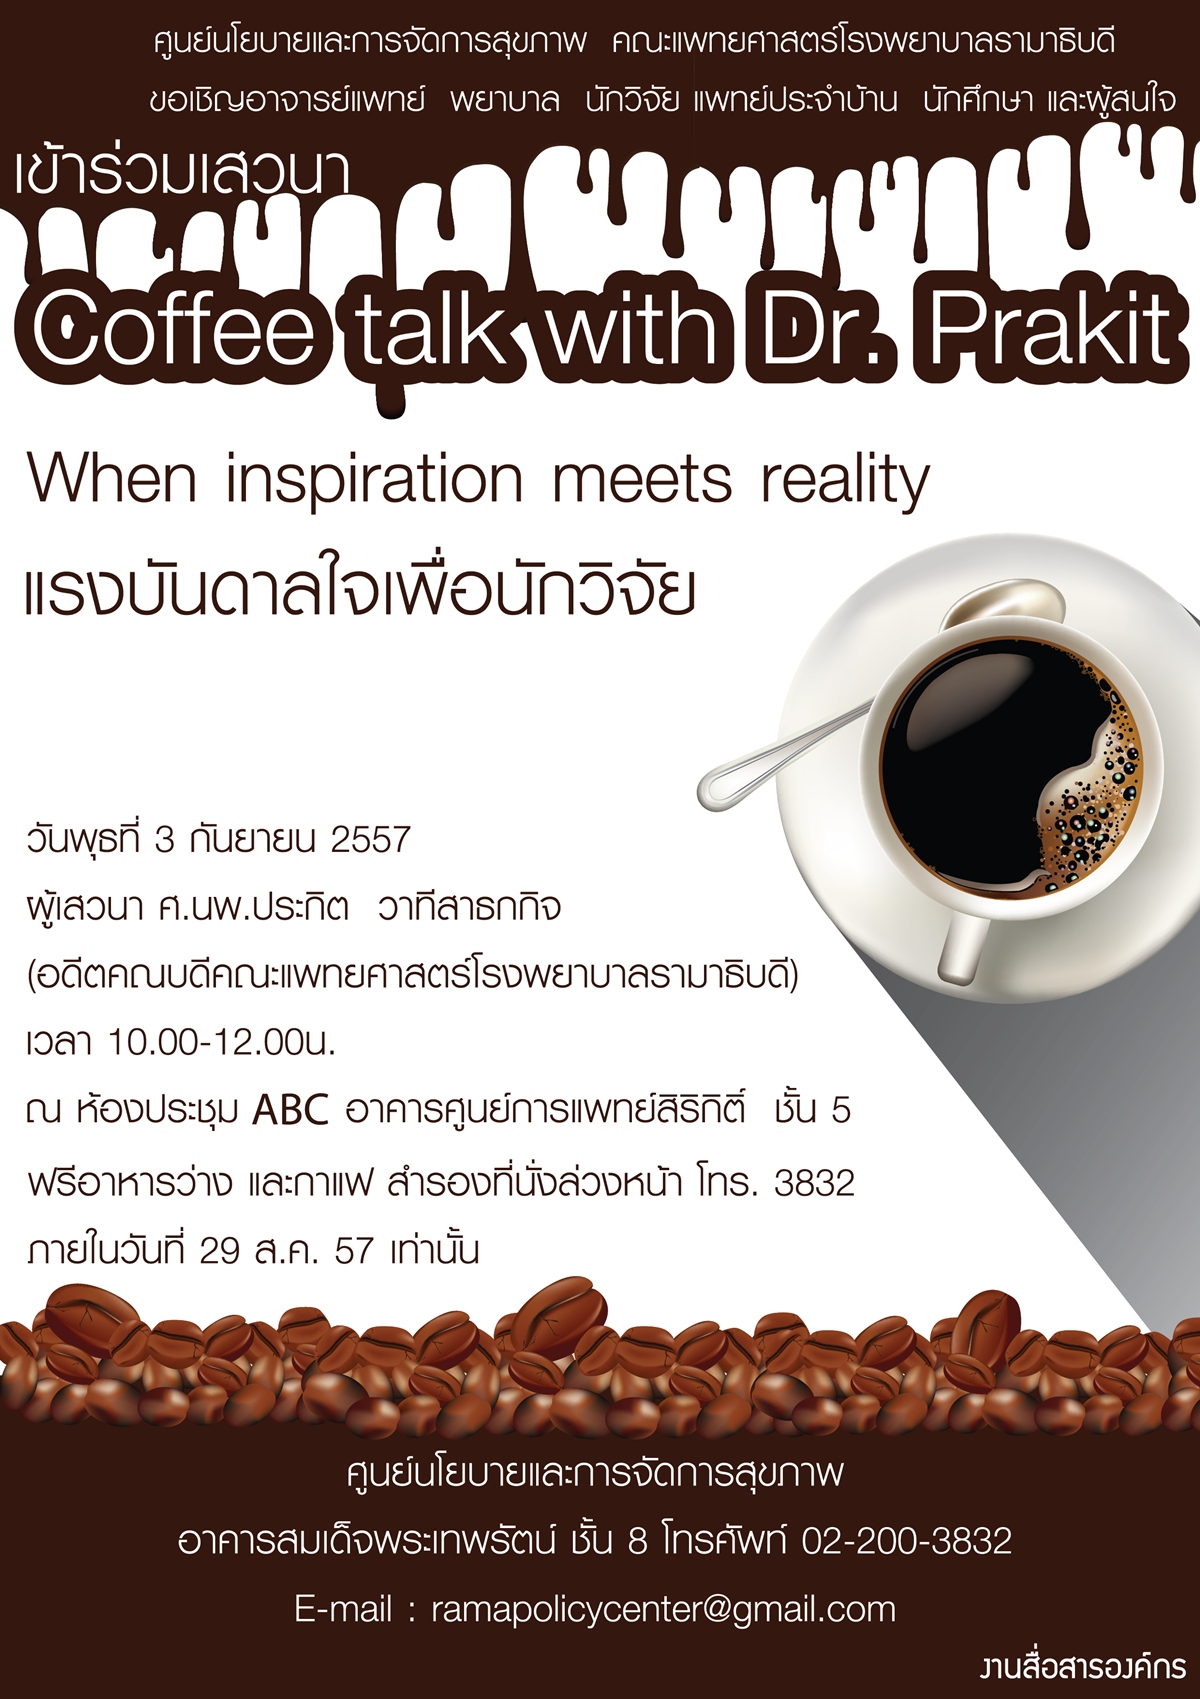 When inspiration meets reality (Coffee talk with Dr.Prakit)